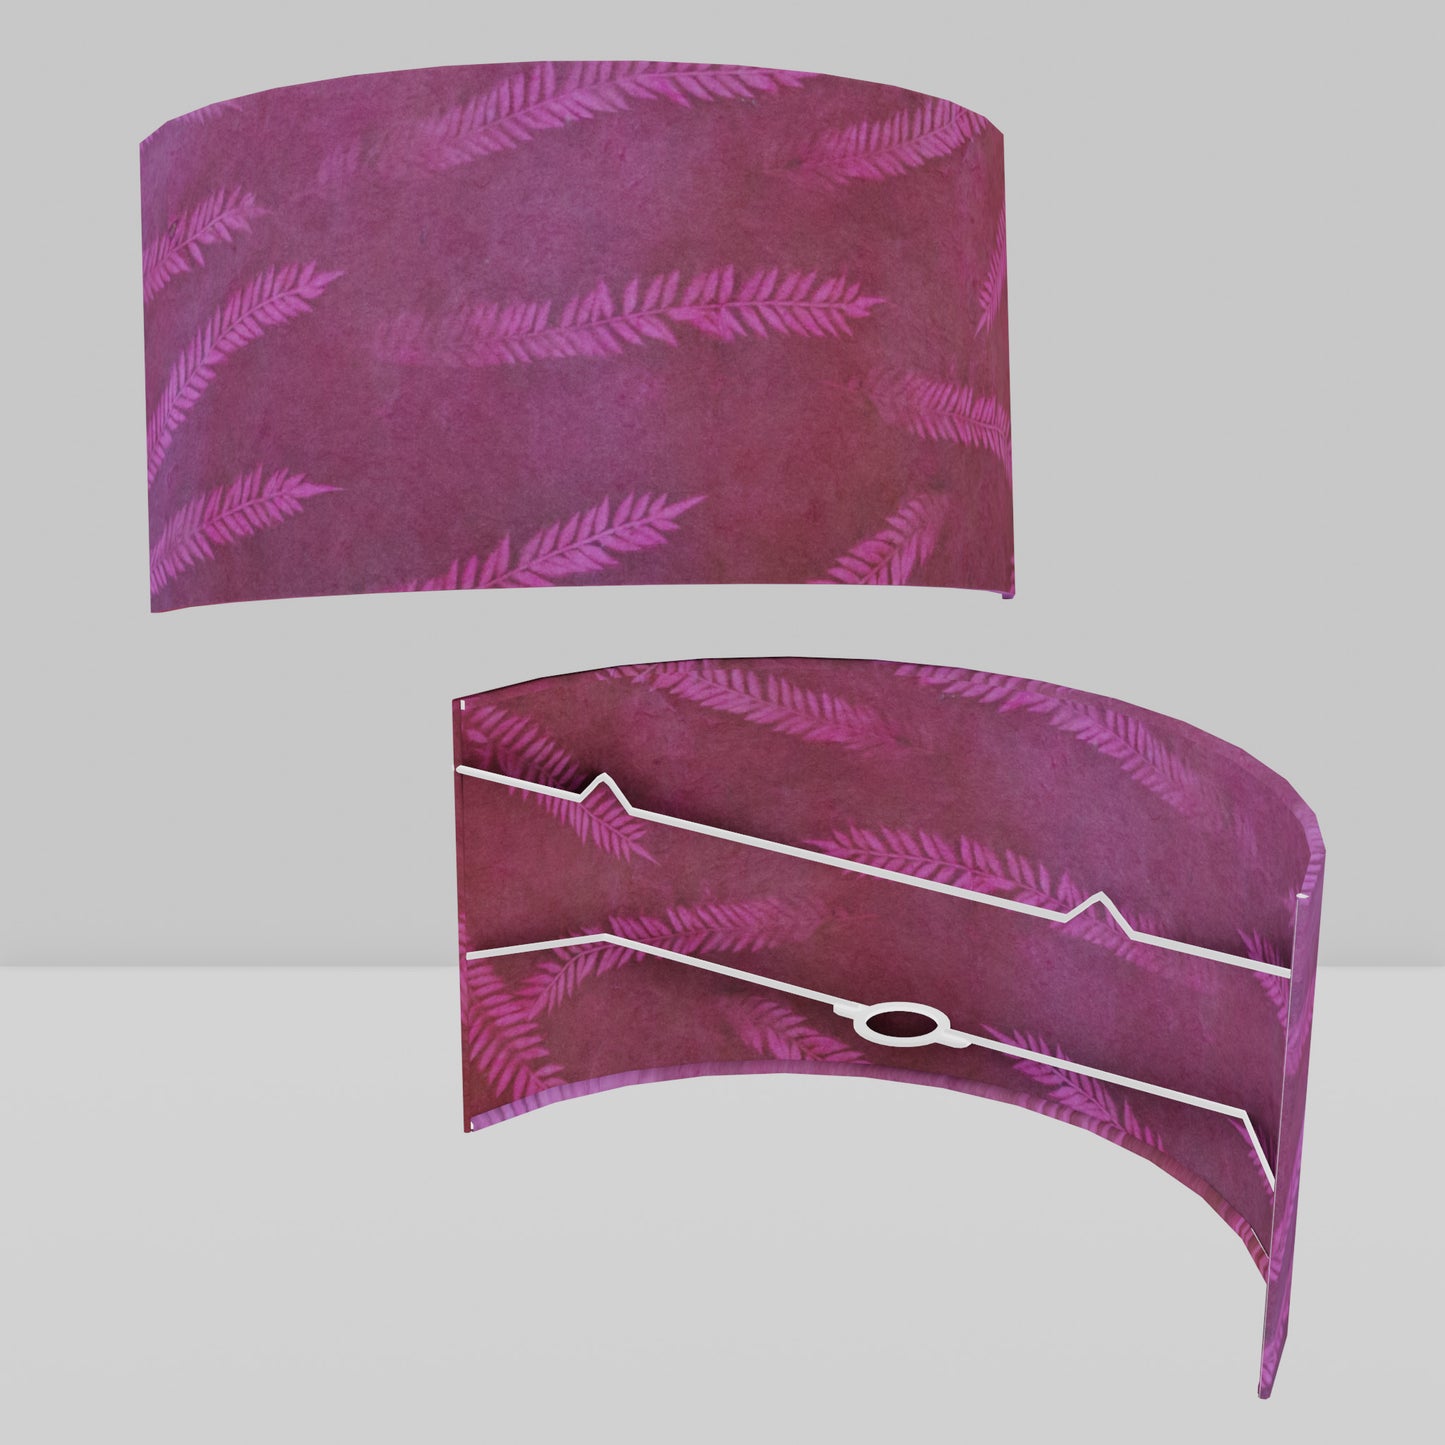 Wall Light - P25 - Resistance Dyed Pink Fern, 36cm(wide) x 20cm(h)